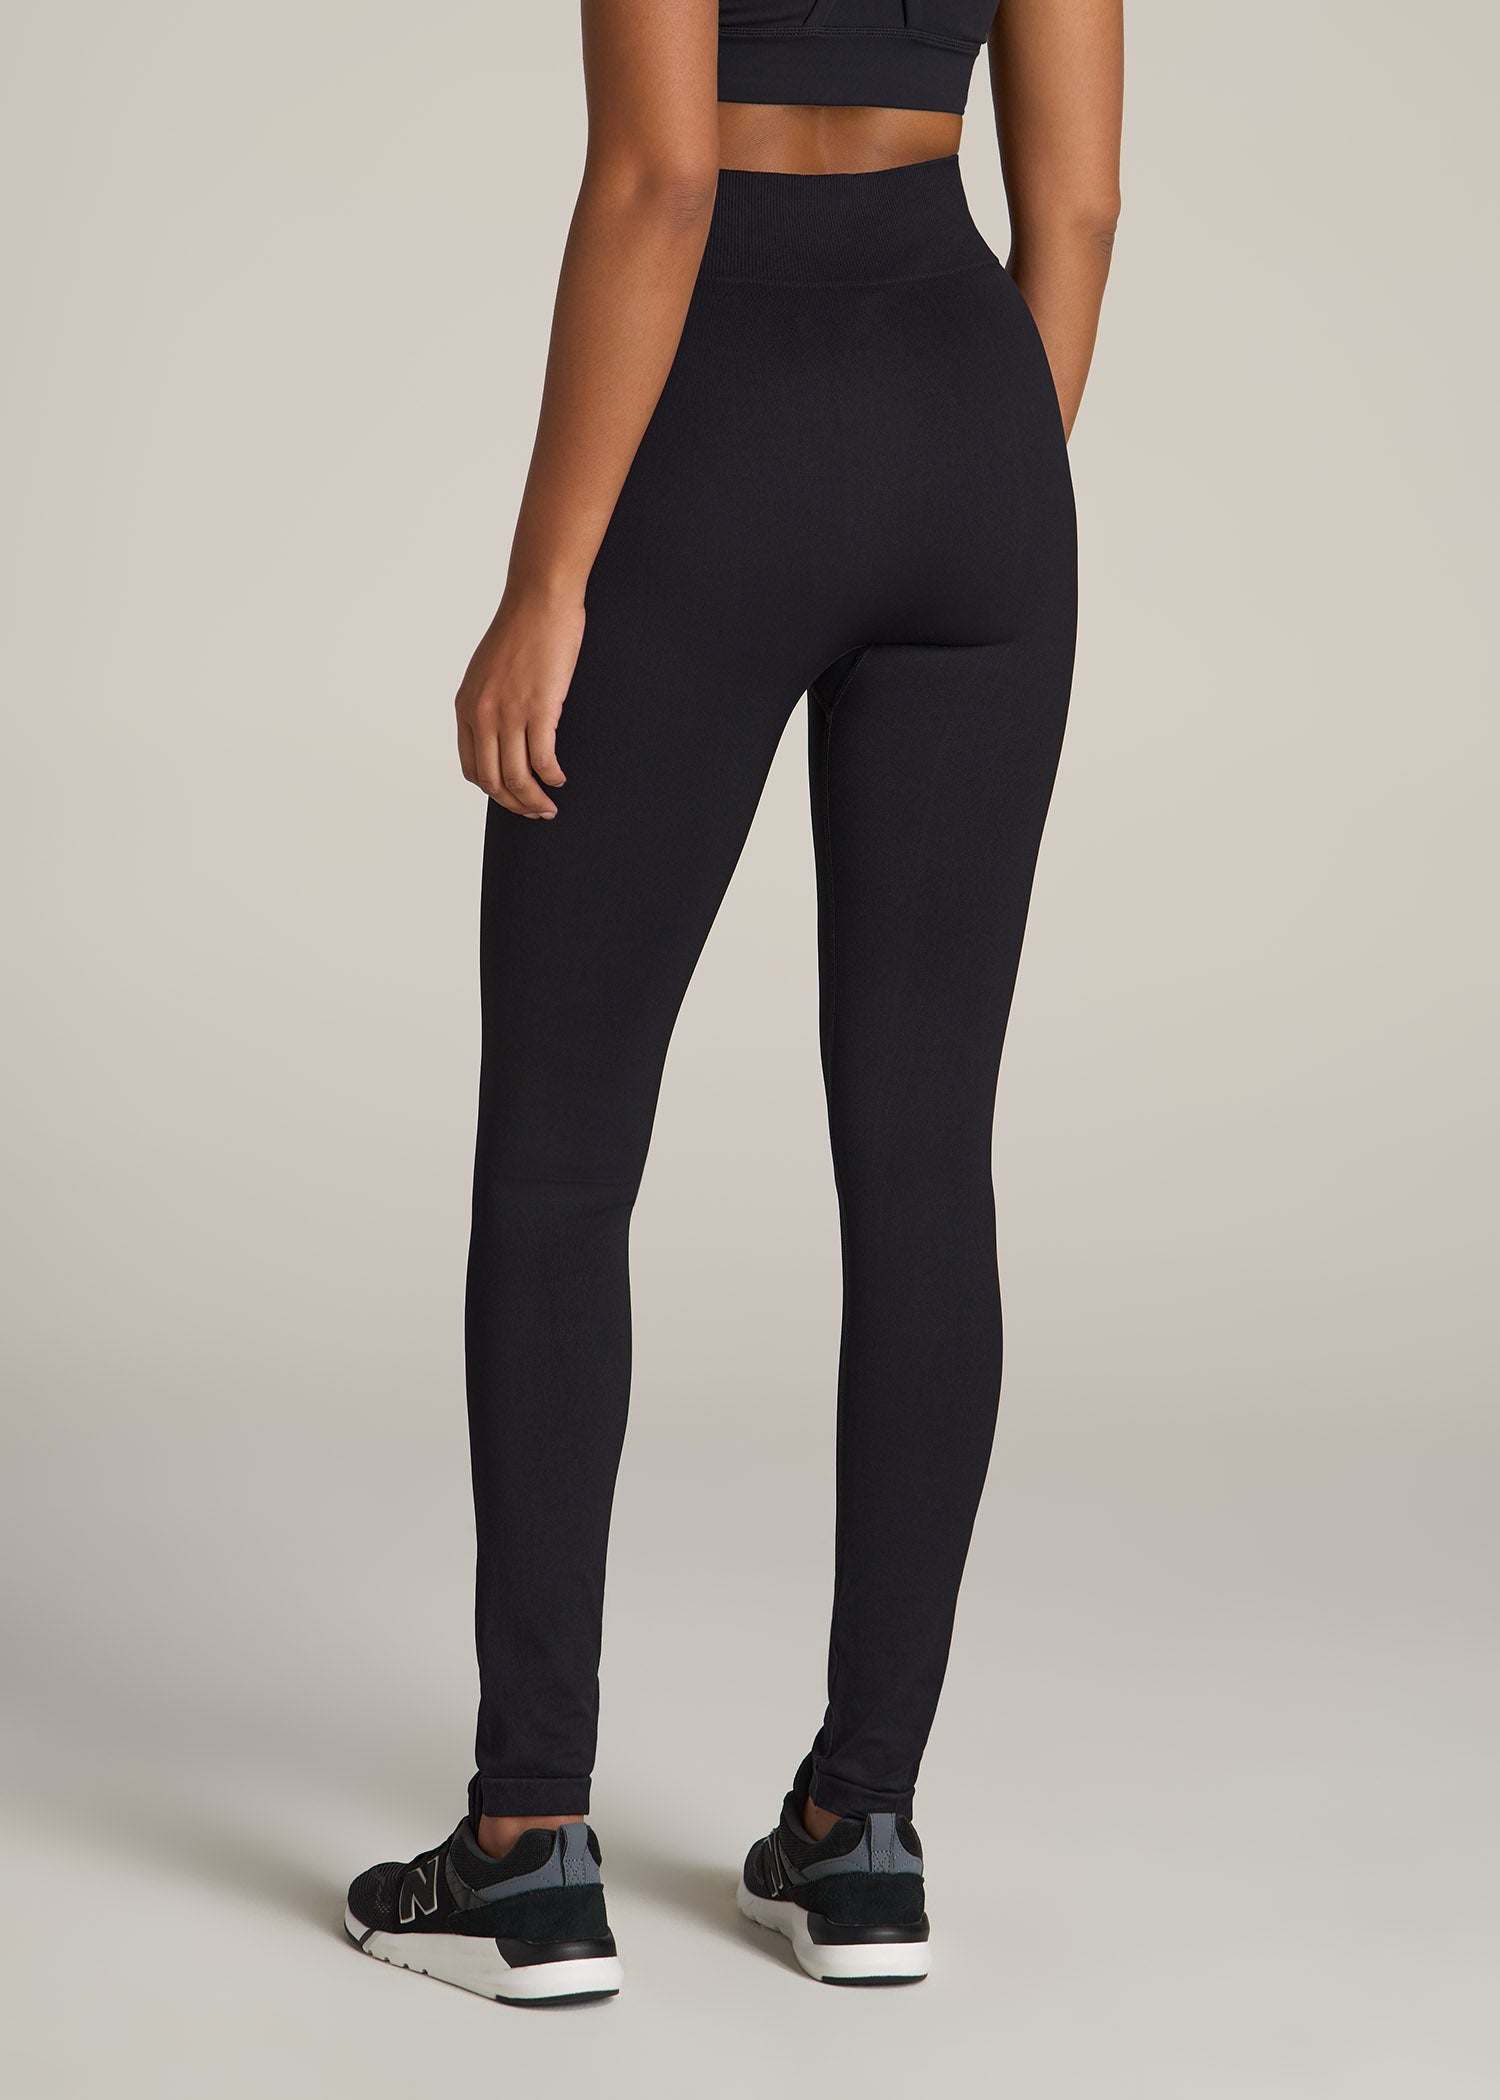 American-Tall-Women-Seamless-Compression-Legging-Solid-Black-back